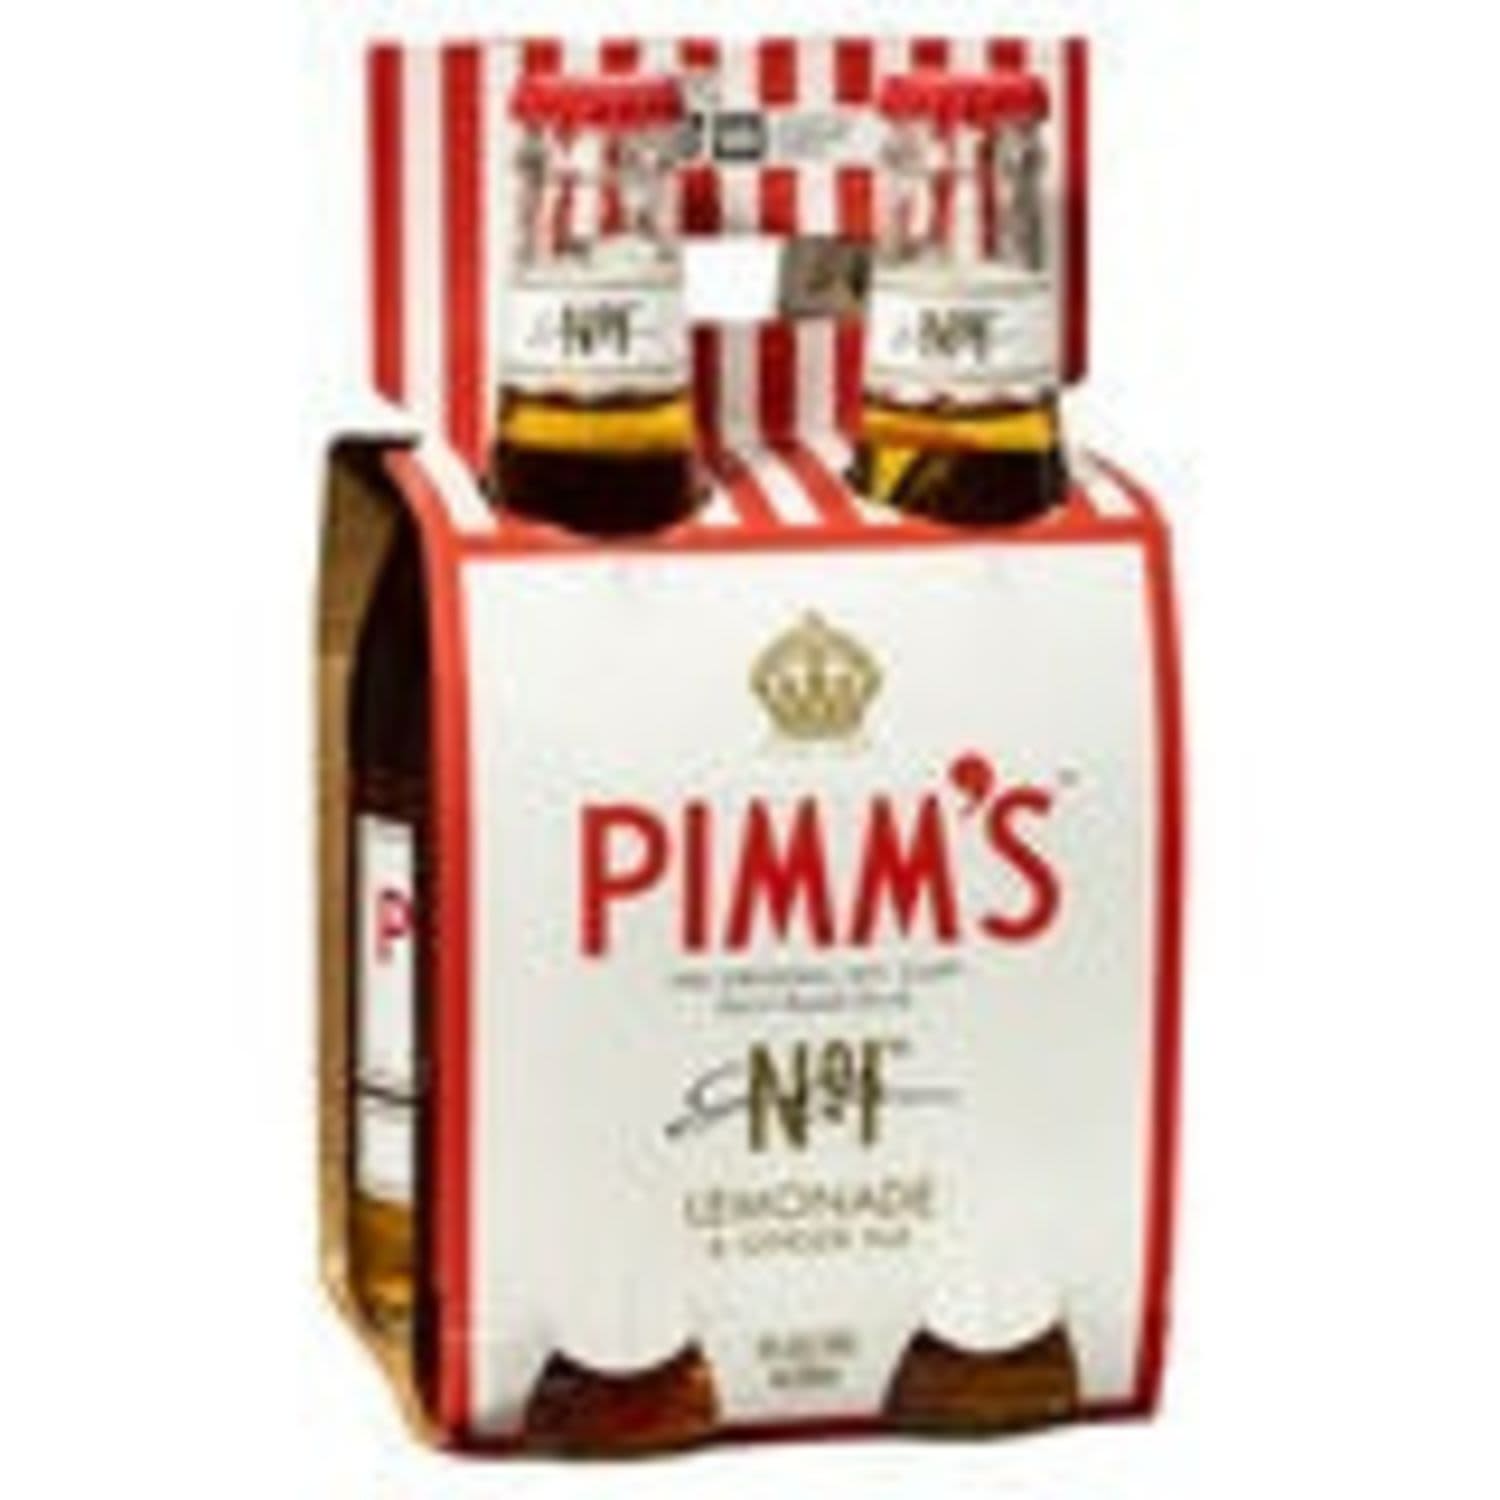 Pimm's No 1 Cup Lemonade and Ginger Ale 330mL 4 Pack